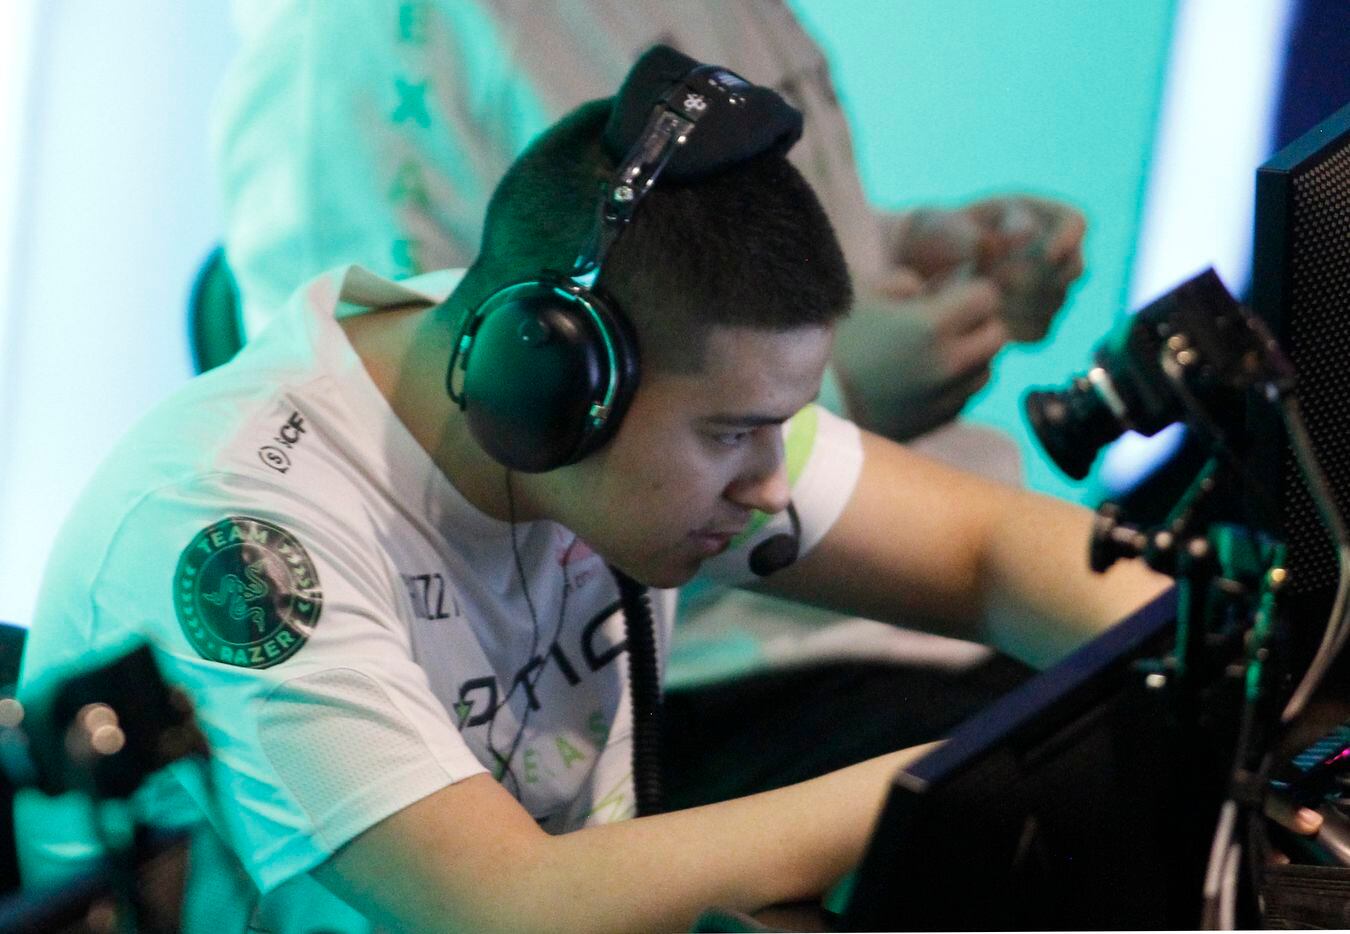 OpTic Texas player Anthony "Shotzzy" Cuevas prepares for the team's first match against...